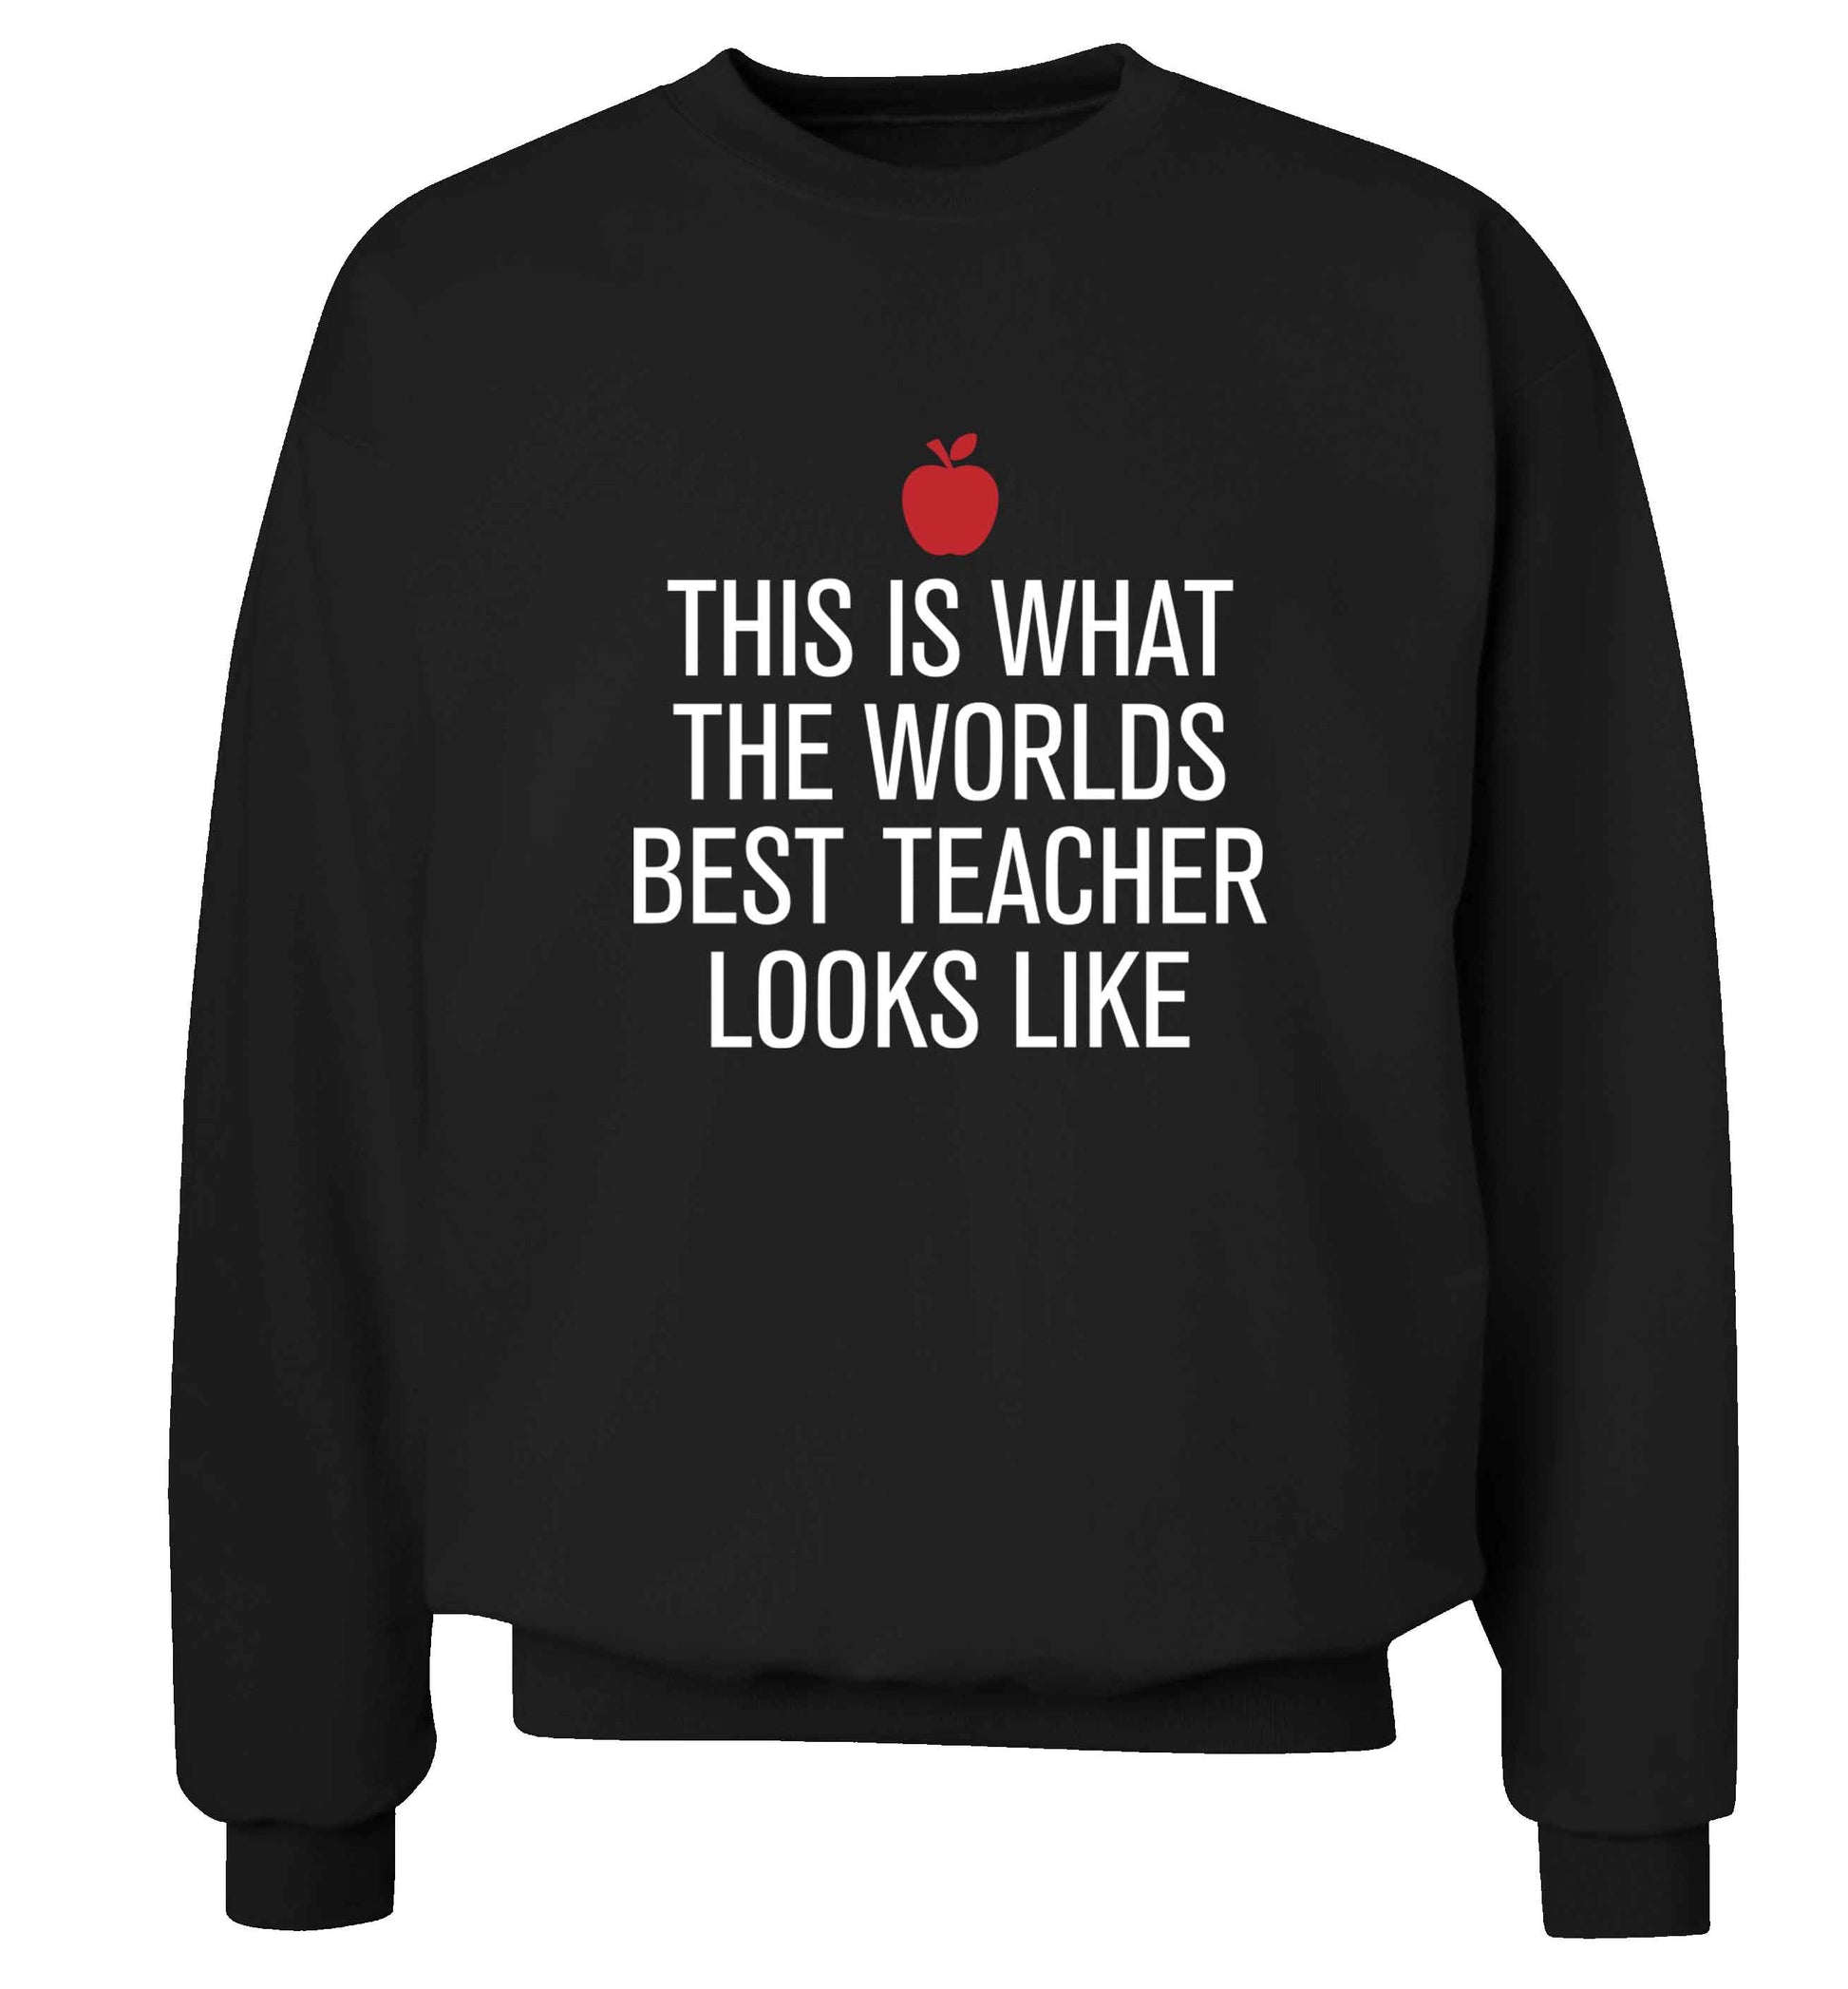 This is what the worlds best teacher looks like adult's unisex black sweater 2XL